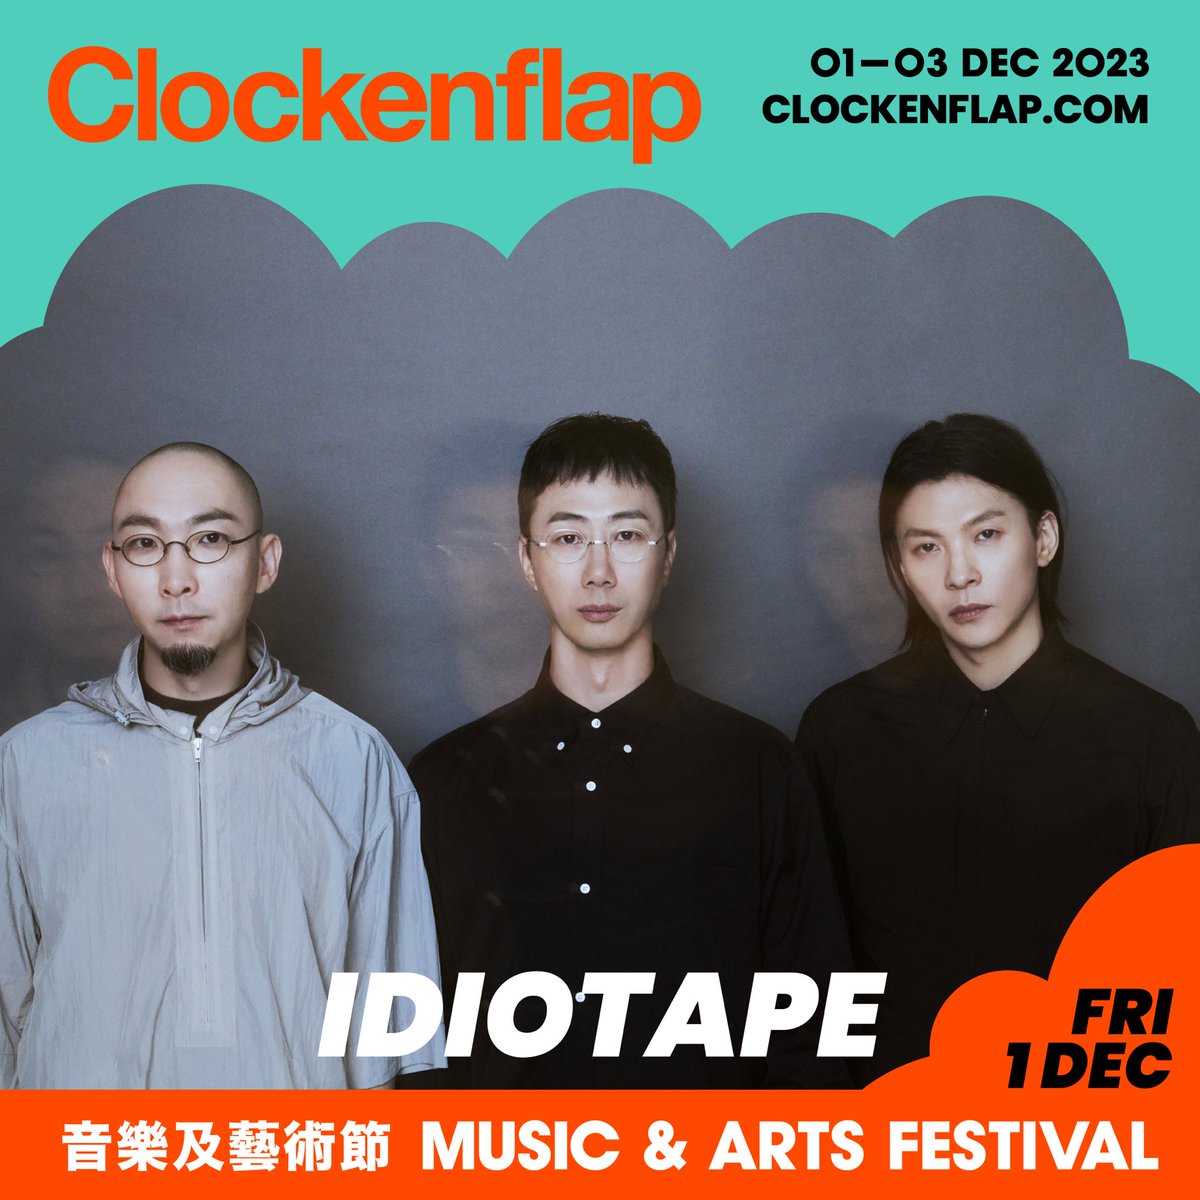 Influenced by everyone from The Doors, Metallica and Radiohead to Korean rock bands from the ‘60s and ‘70s, South Korea’s Idiotape play a thrilling blend of techno, synth-rock, metal and electro that is as danceable as it is infectious. ticketflap.com/clockenflapdec…